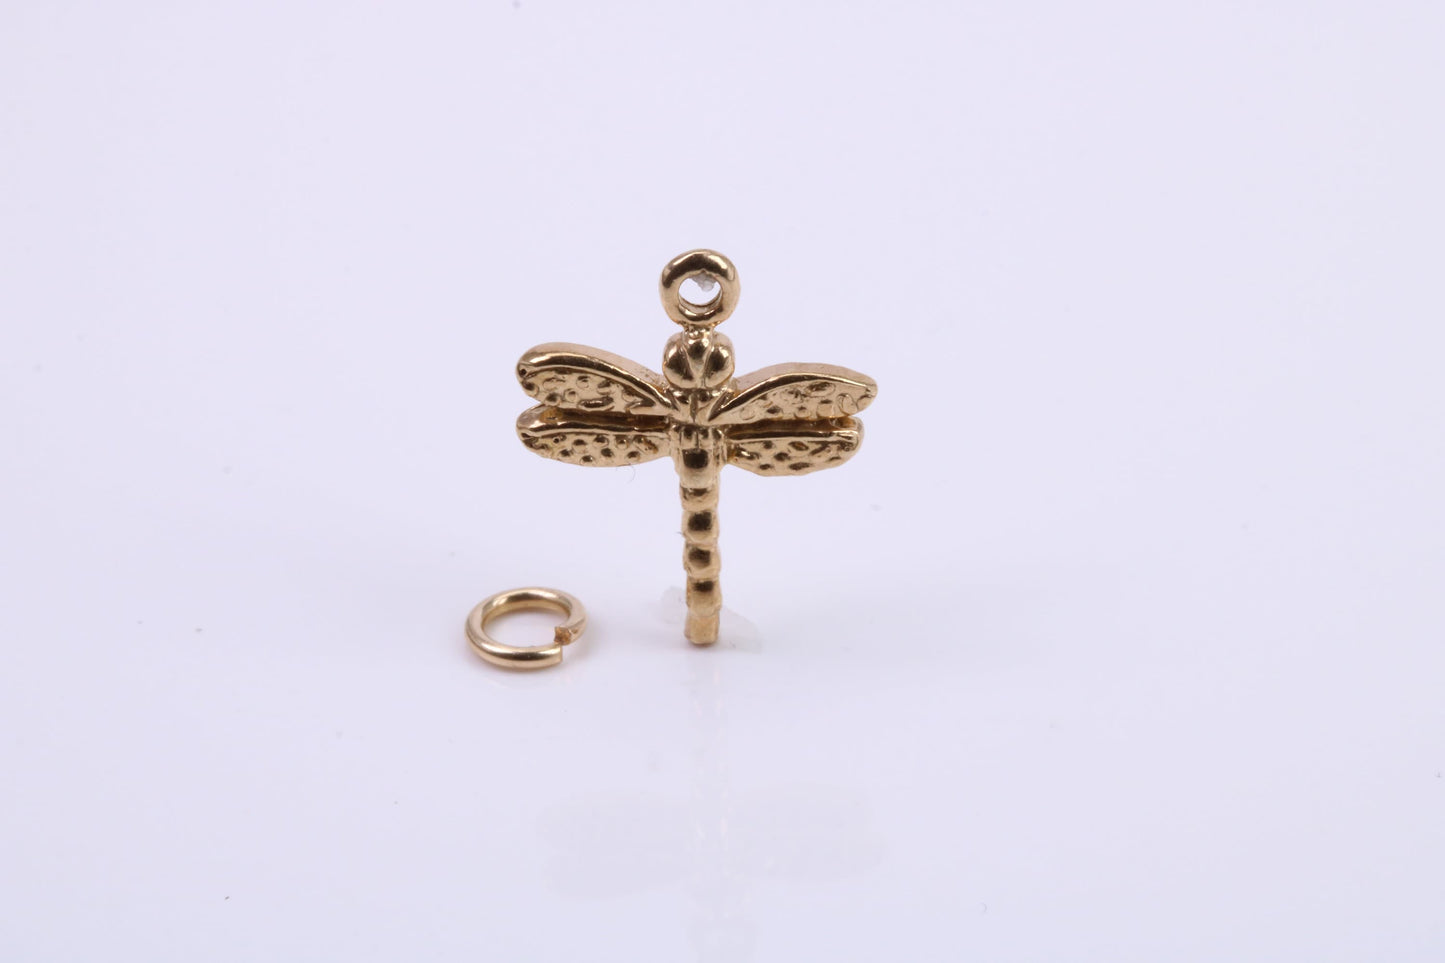 Dragon Fly Charm, Traditional Charm, Made from Solid 9ct Yellow Gold, British Hallmarked, Complete with Attachment Link